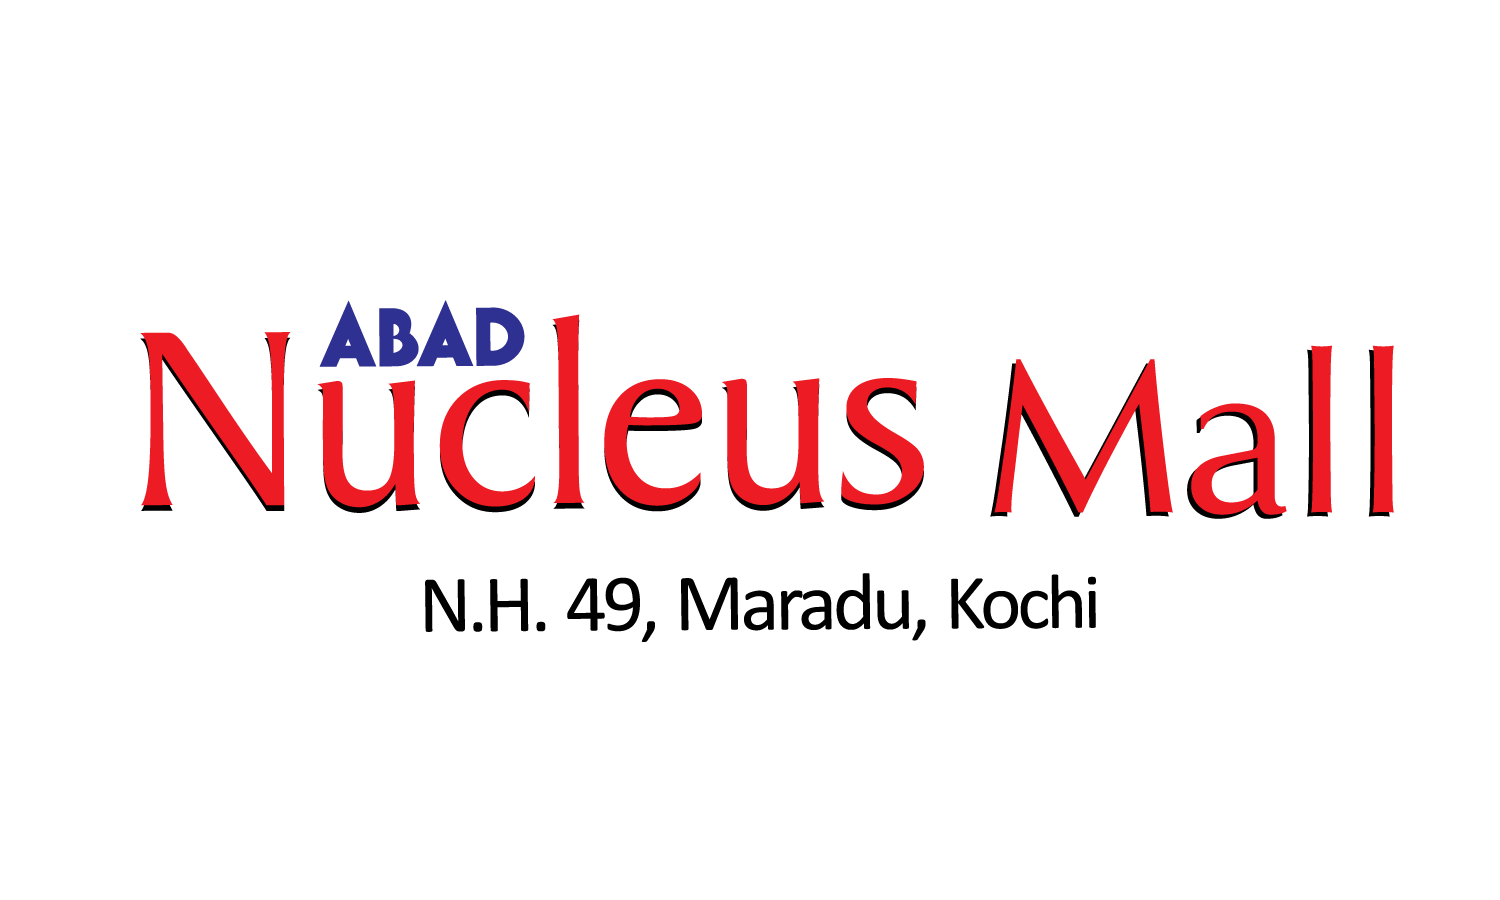 ABAD Nucleus Mall|Mall|Shopping